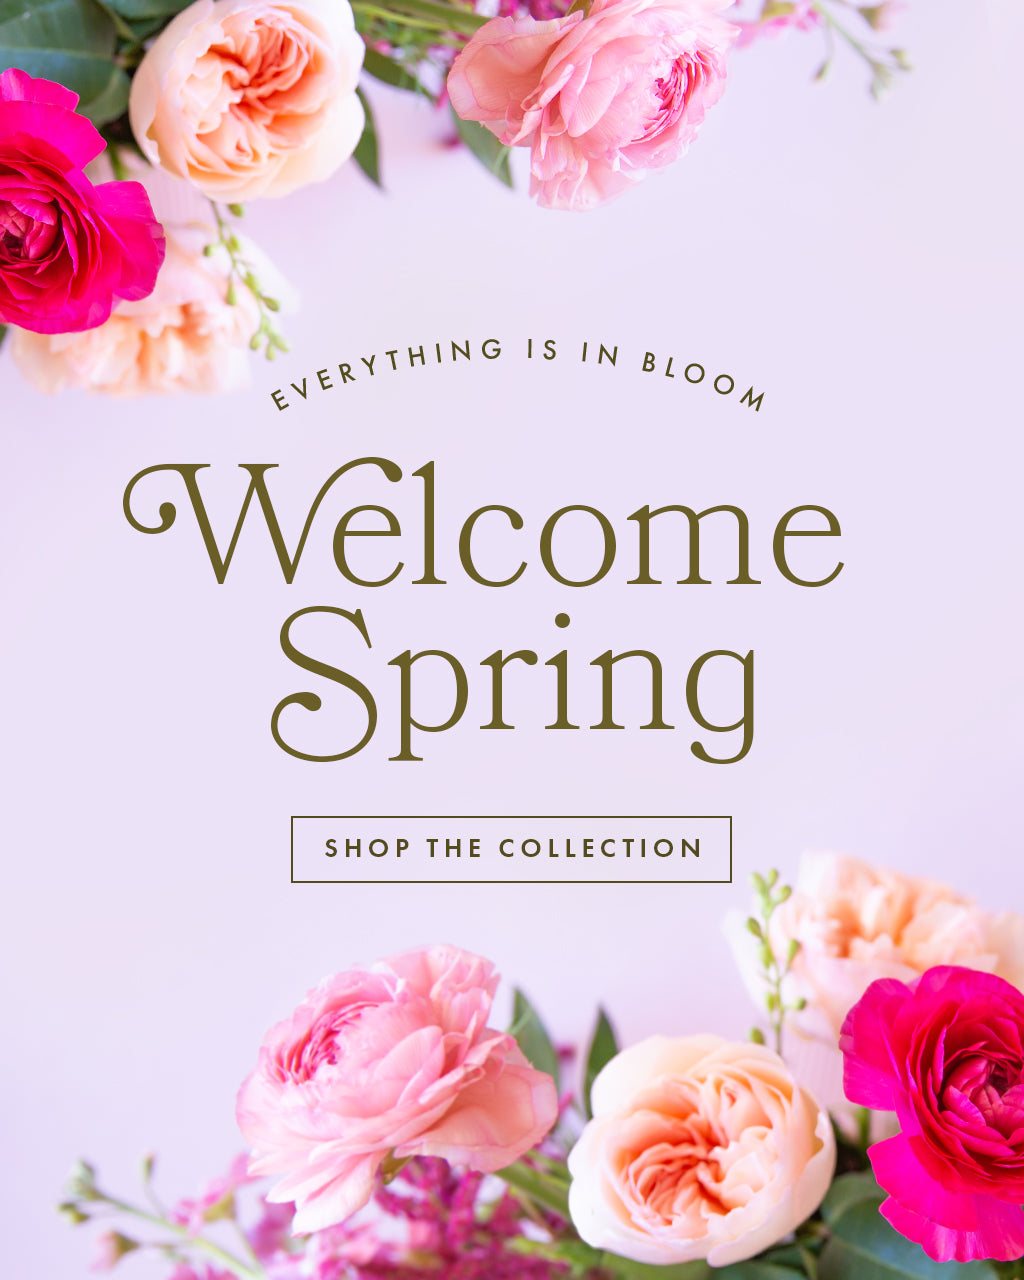 everything is in bloom. welcome spring. shop the collection. pink flowers lay on a lavender ground.